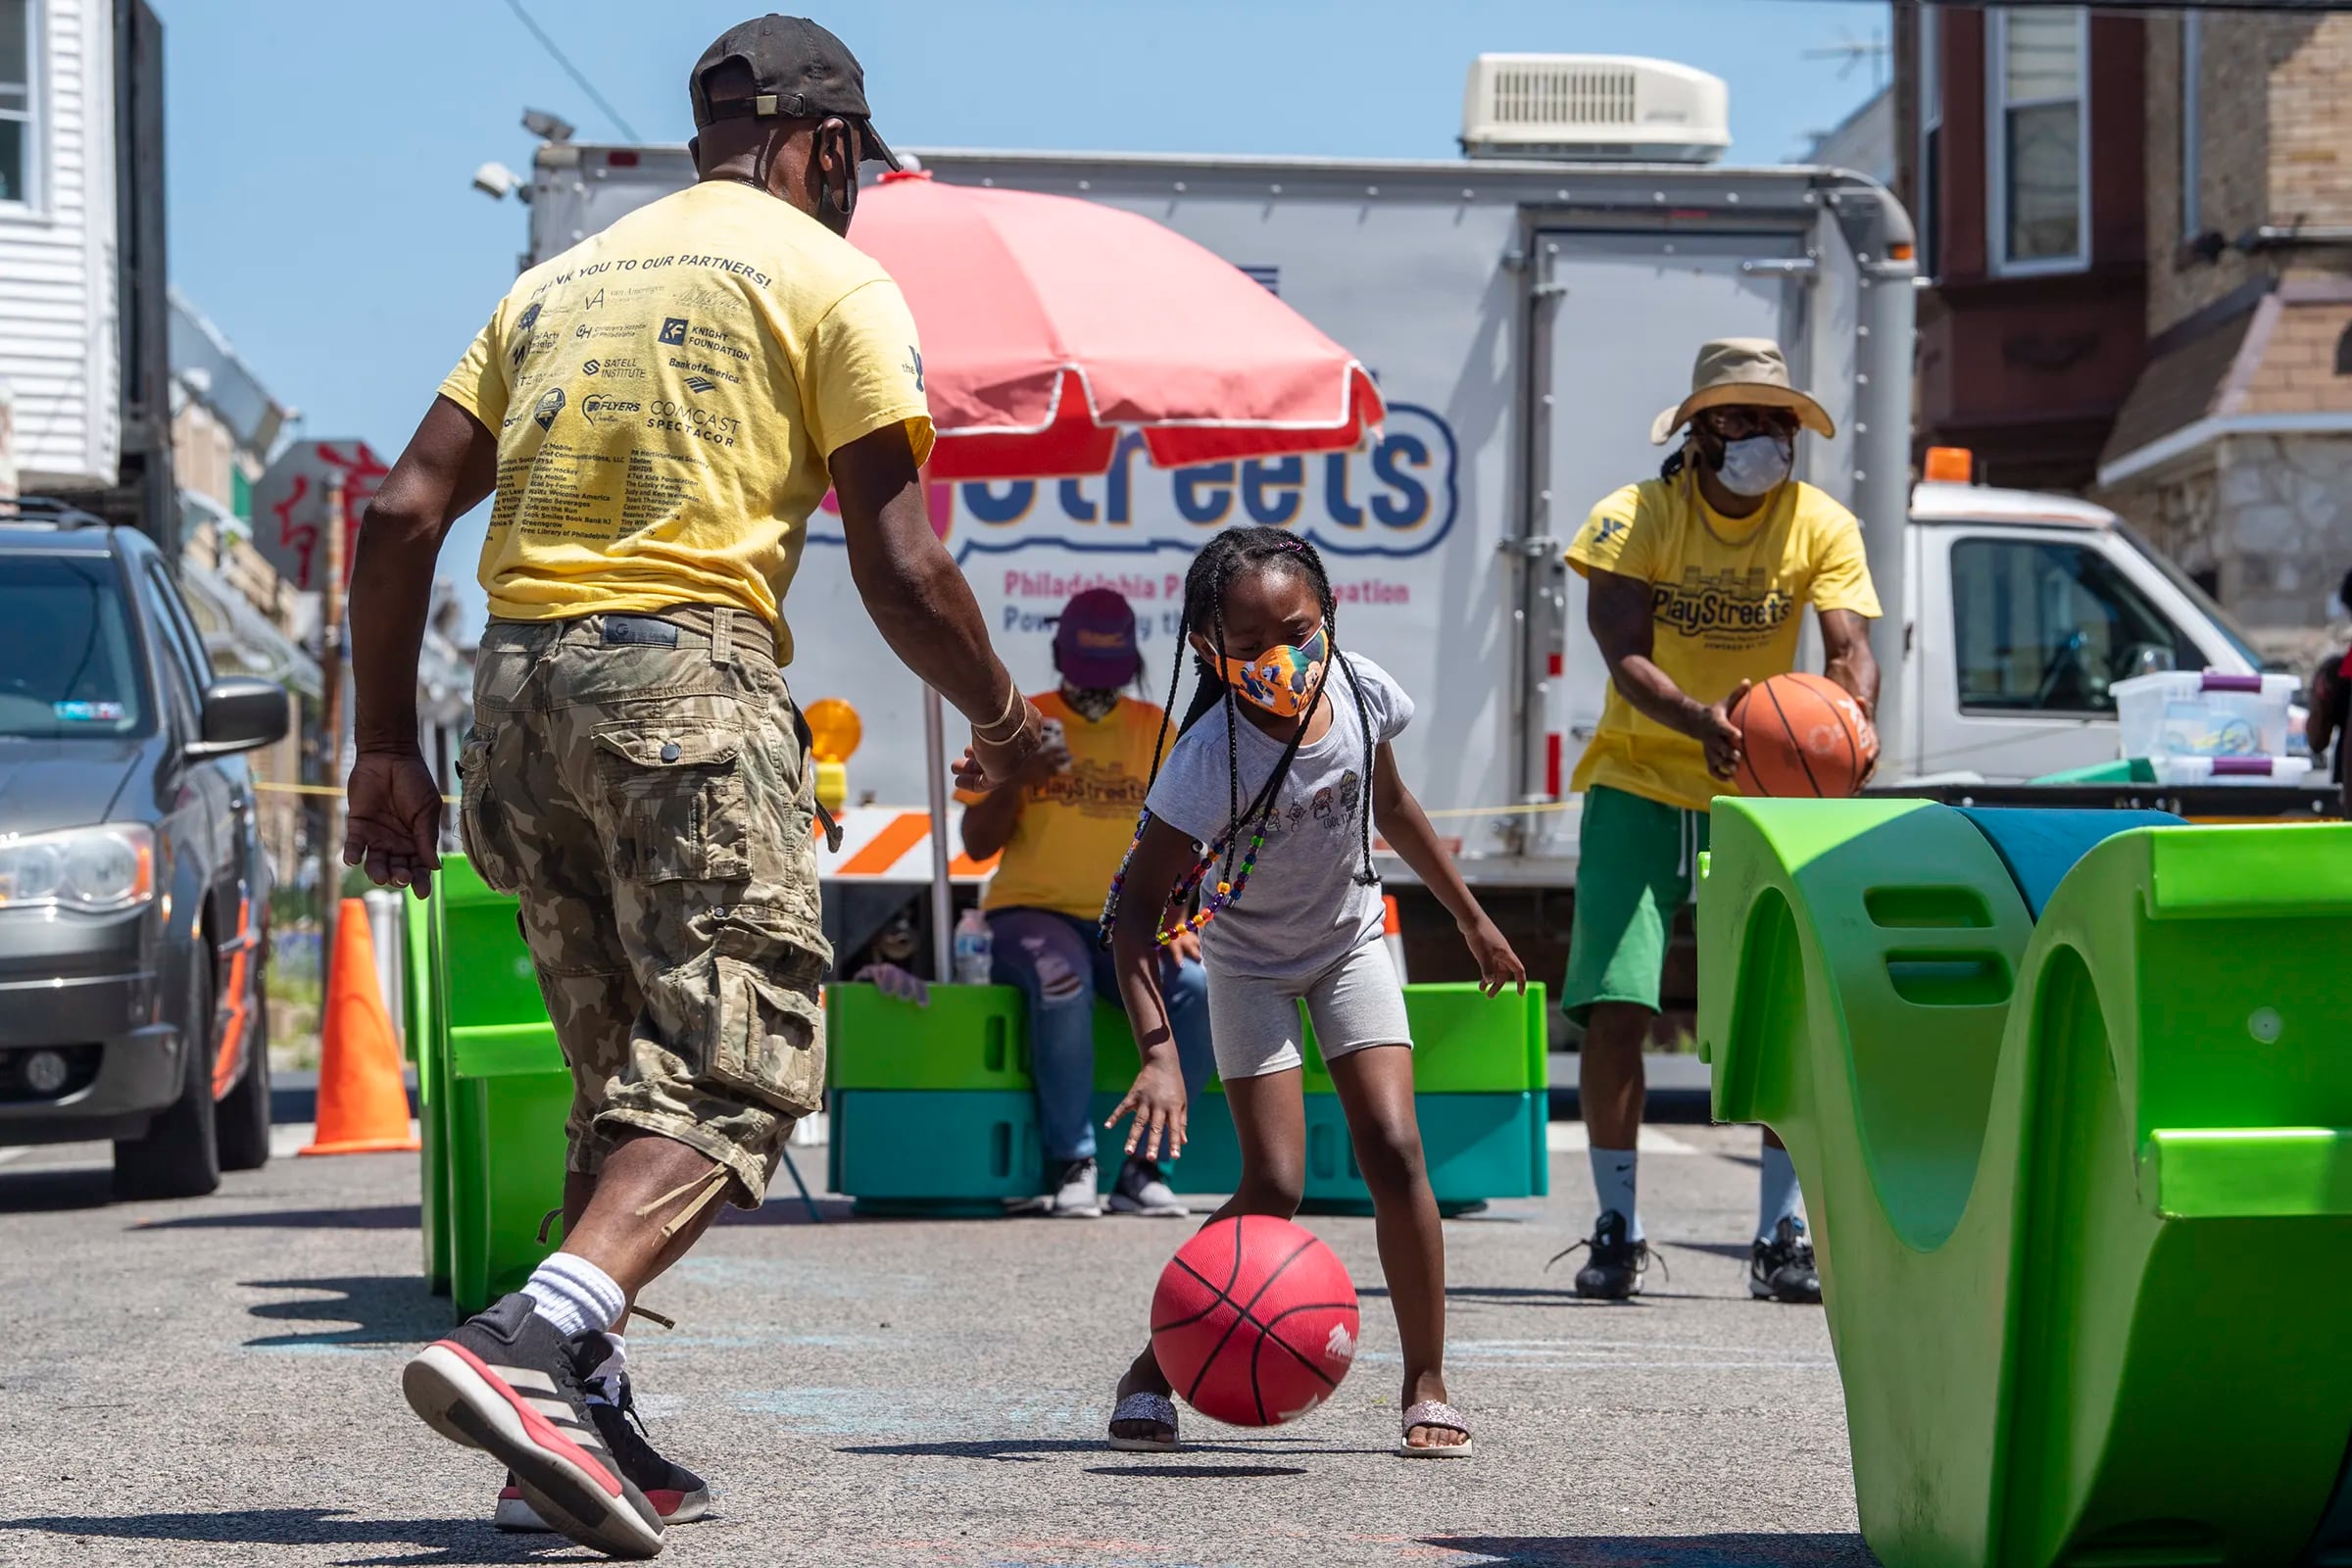 Work hard, play hard. Play Streets pays you to help foster community.